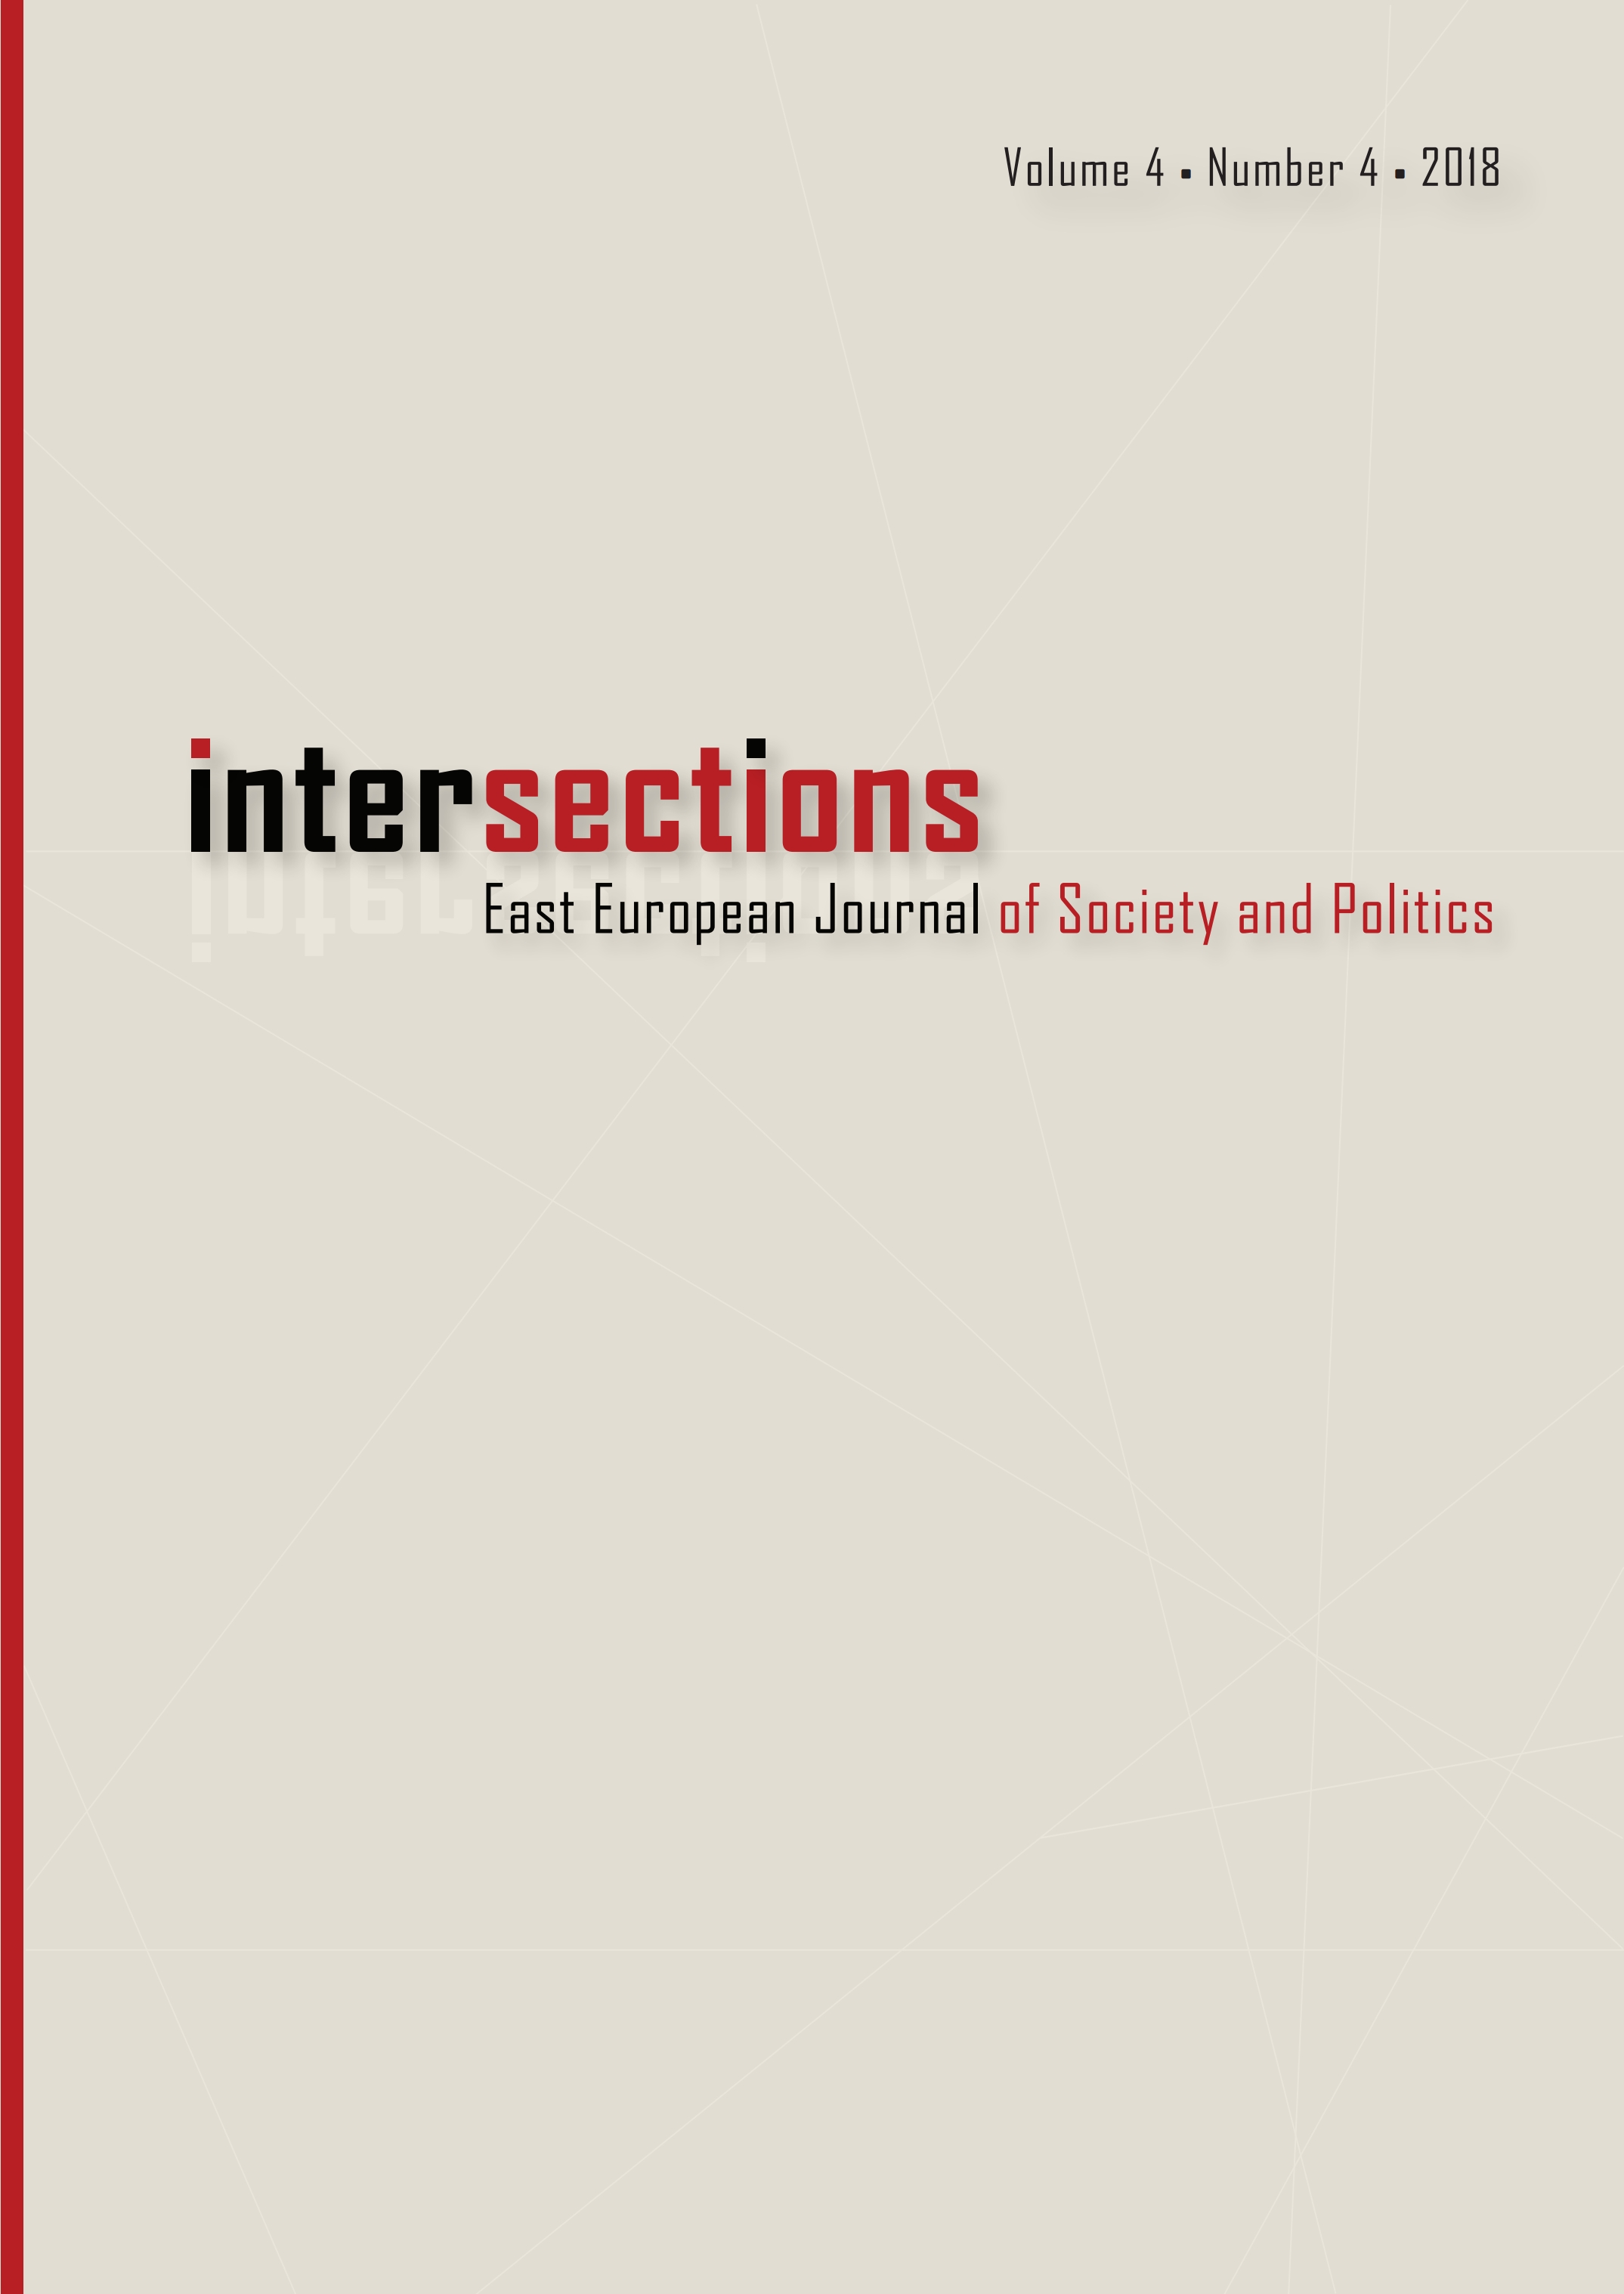 Radicalism and Indifference: Memory Transmission, Political Formation and Modernization in Hungary and Europe